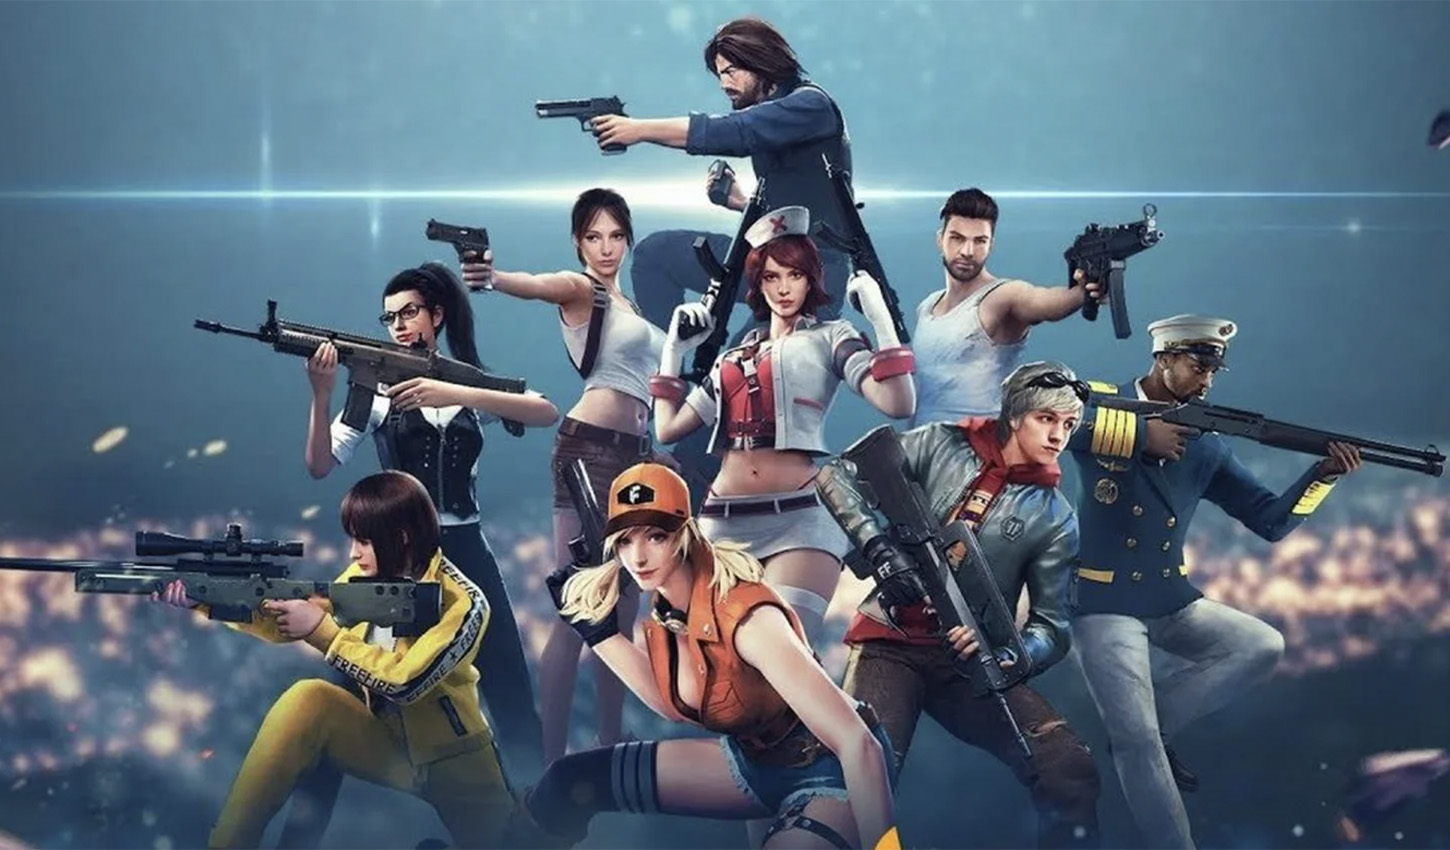 Garena Free Fire Overtakes PUBG Mobile in U.S. as Top Grossing Battle Royale Game main image feature